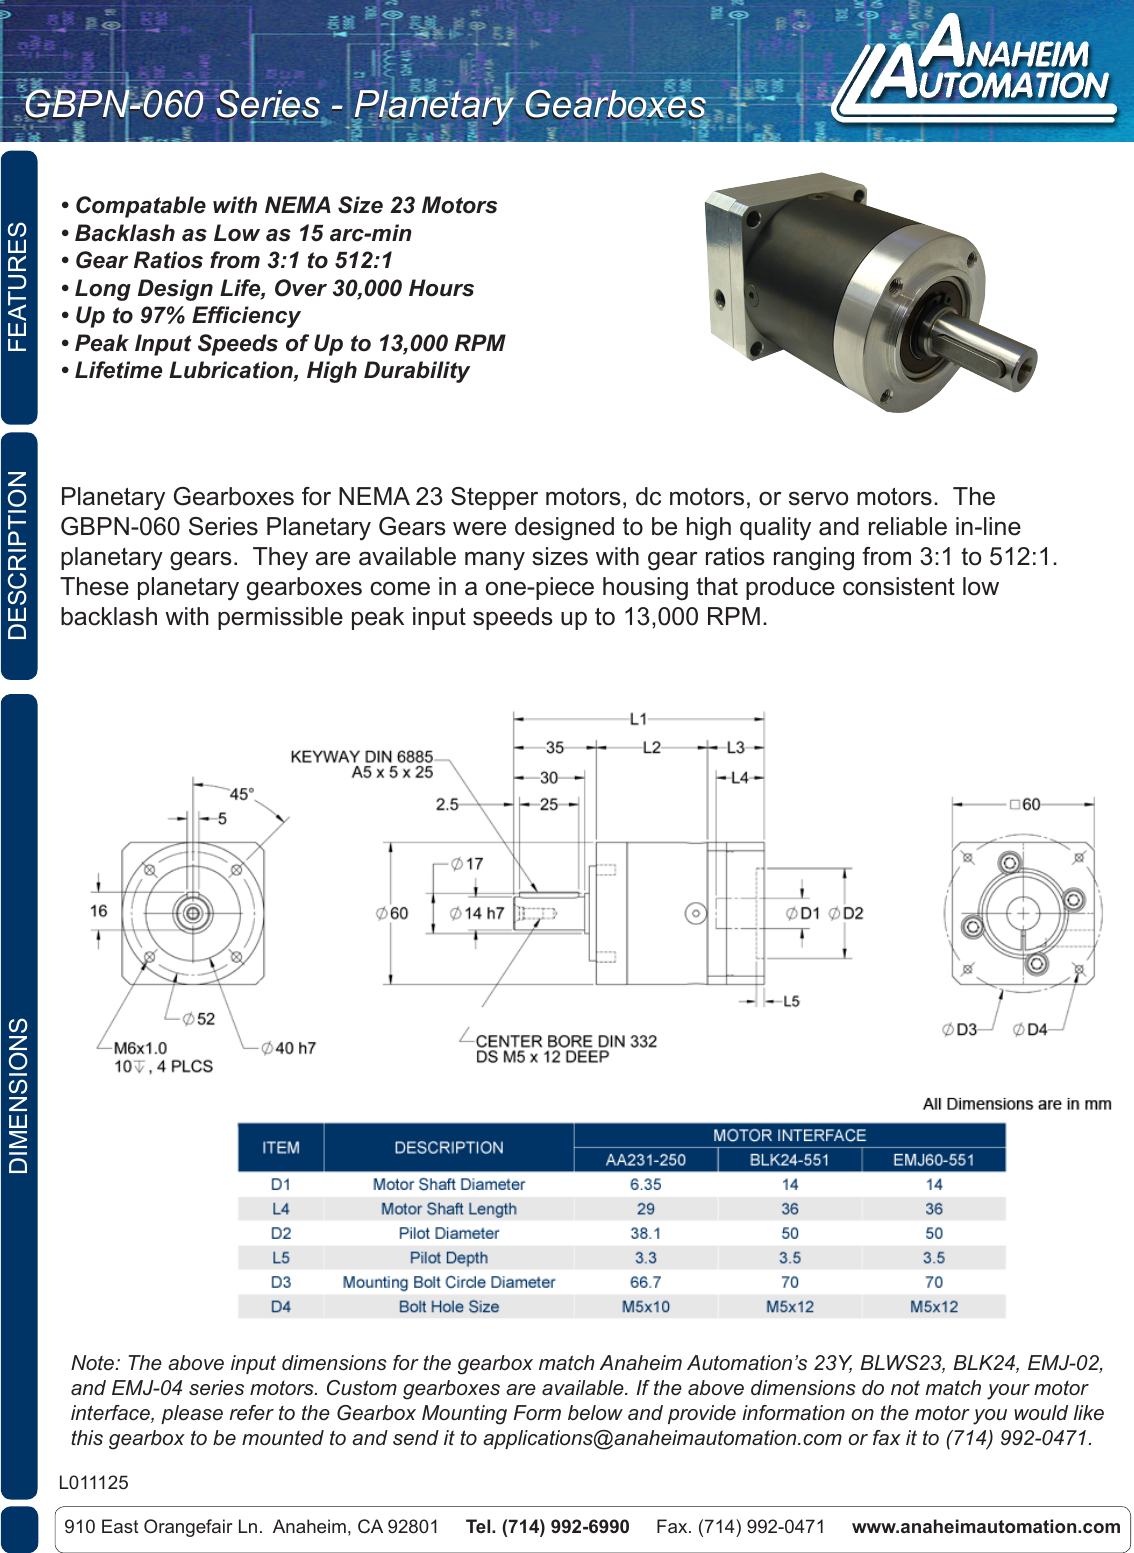 Page 1 of 3 - L011125 - GBPN-060 Series Planetary Gears